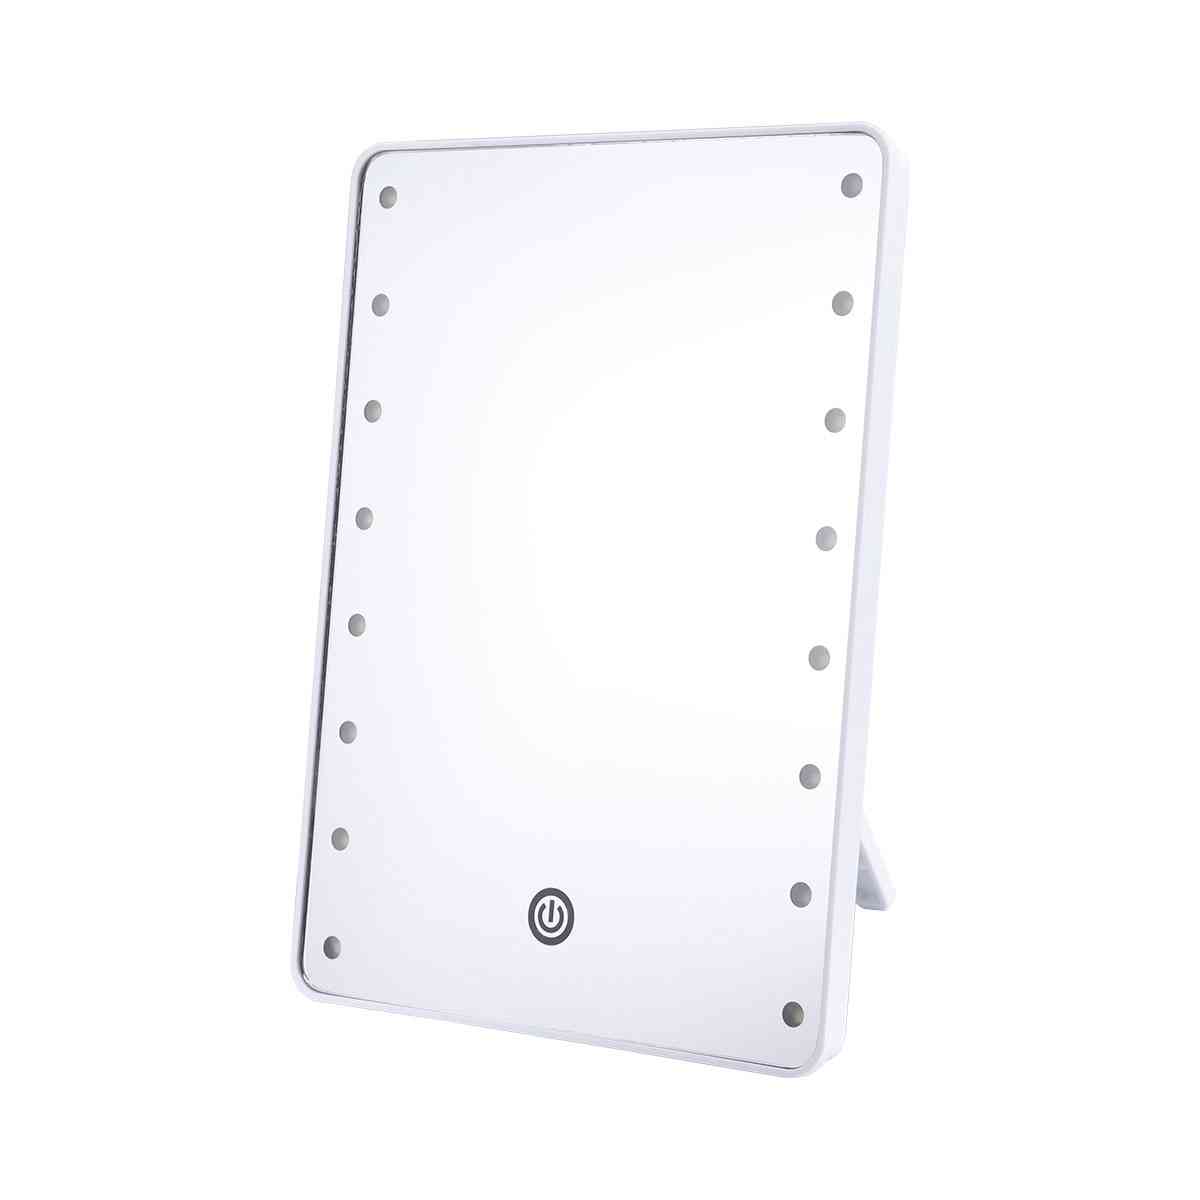 Cosmetic Mirror With 16 Leds, Touch Dimmer Switch - Battery Operated